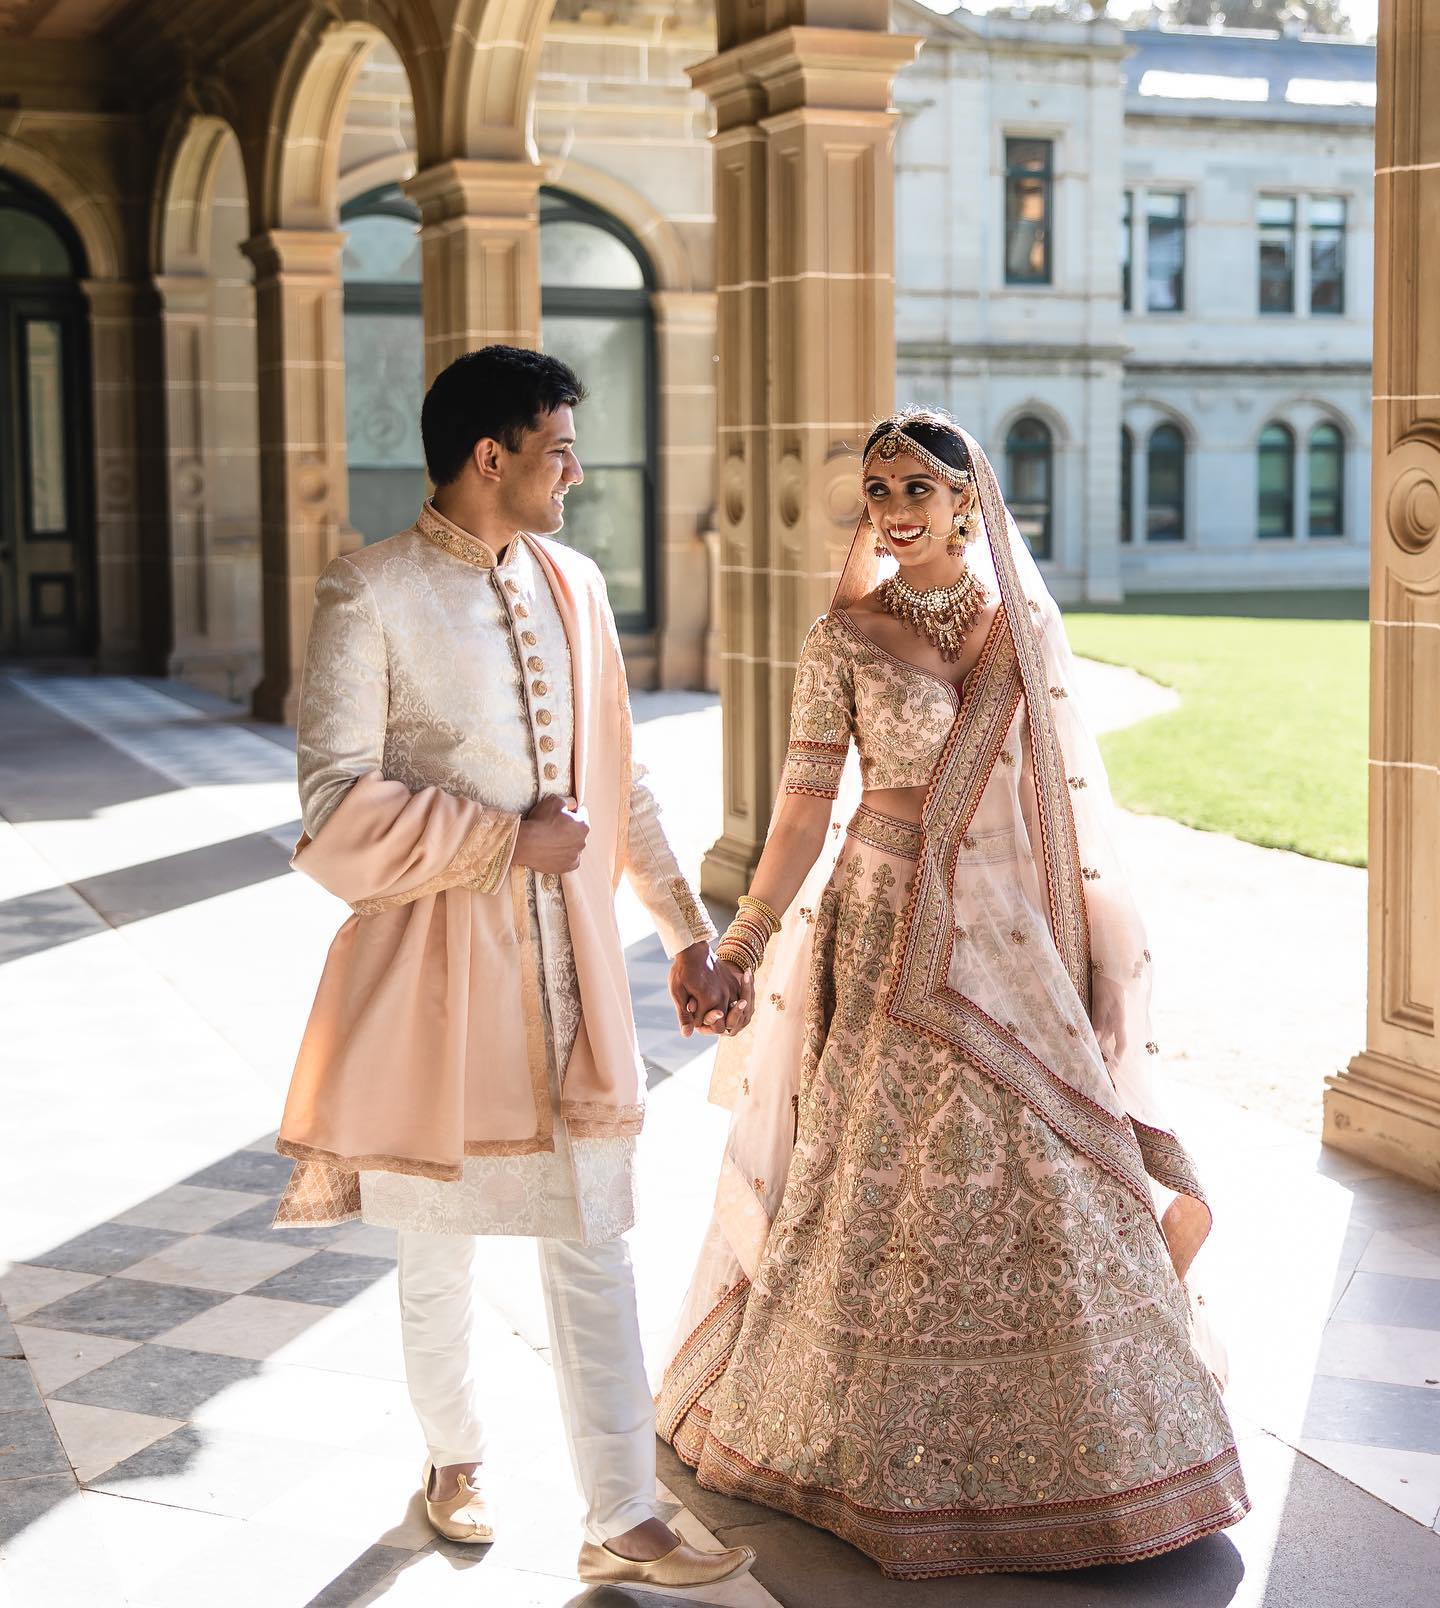 What coloured formal suit of a groom can match the peach lehenga of a  bride? - Quora